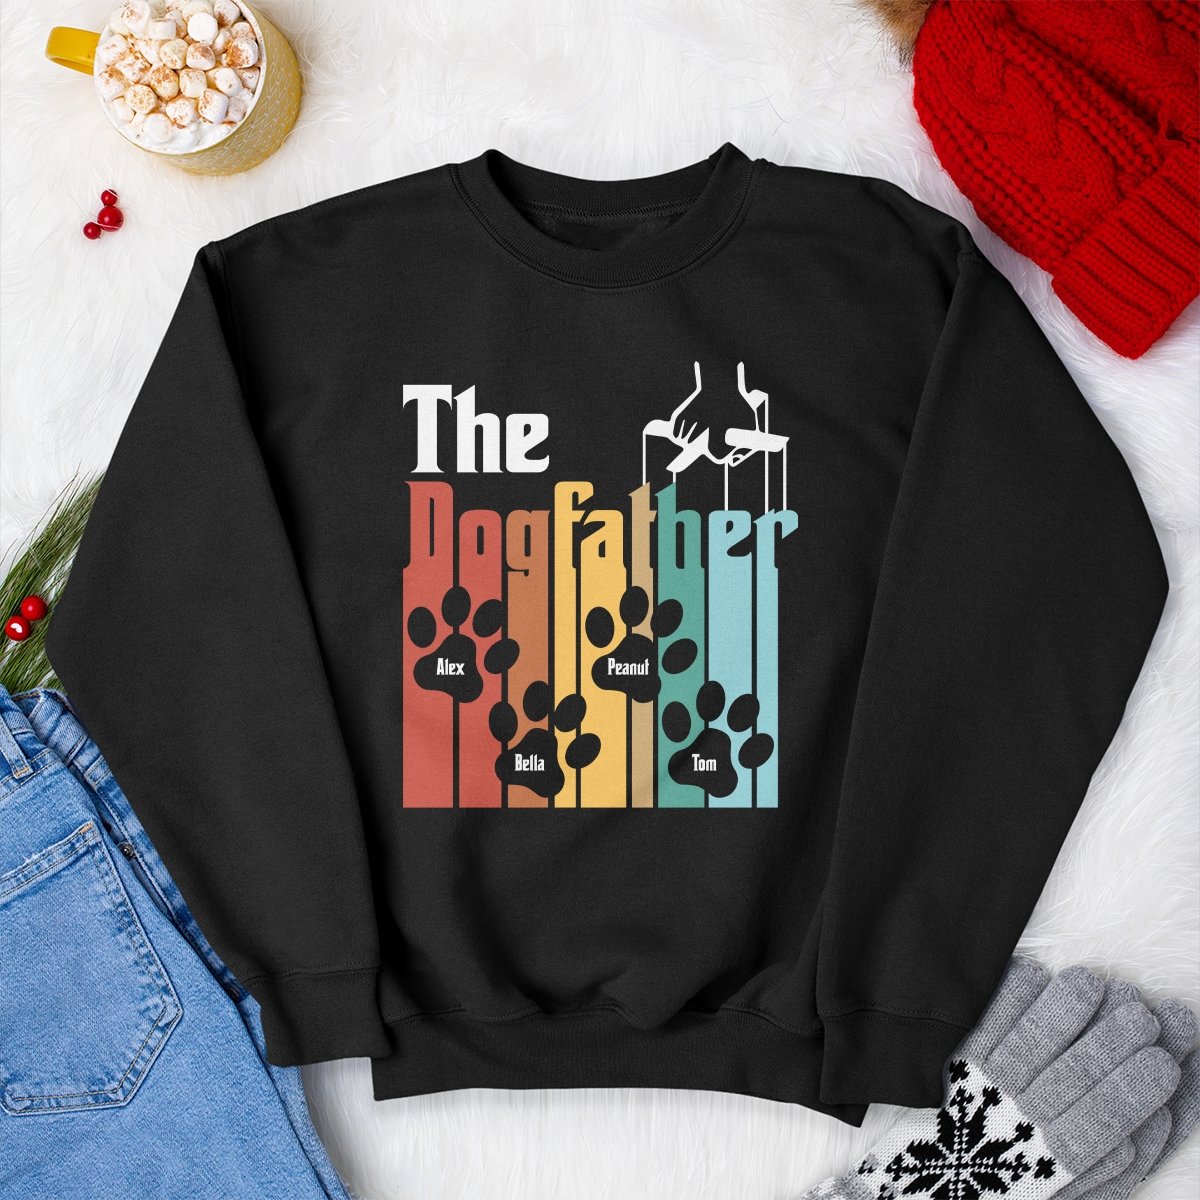 The DogFather Personalized Shirt